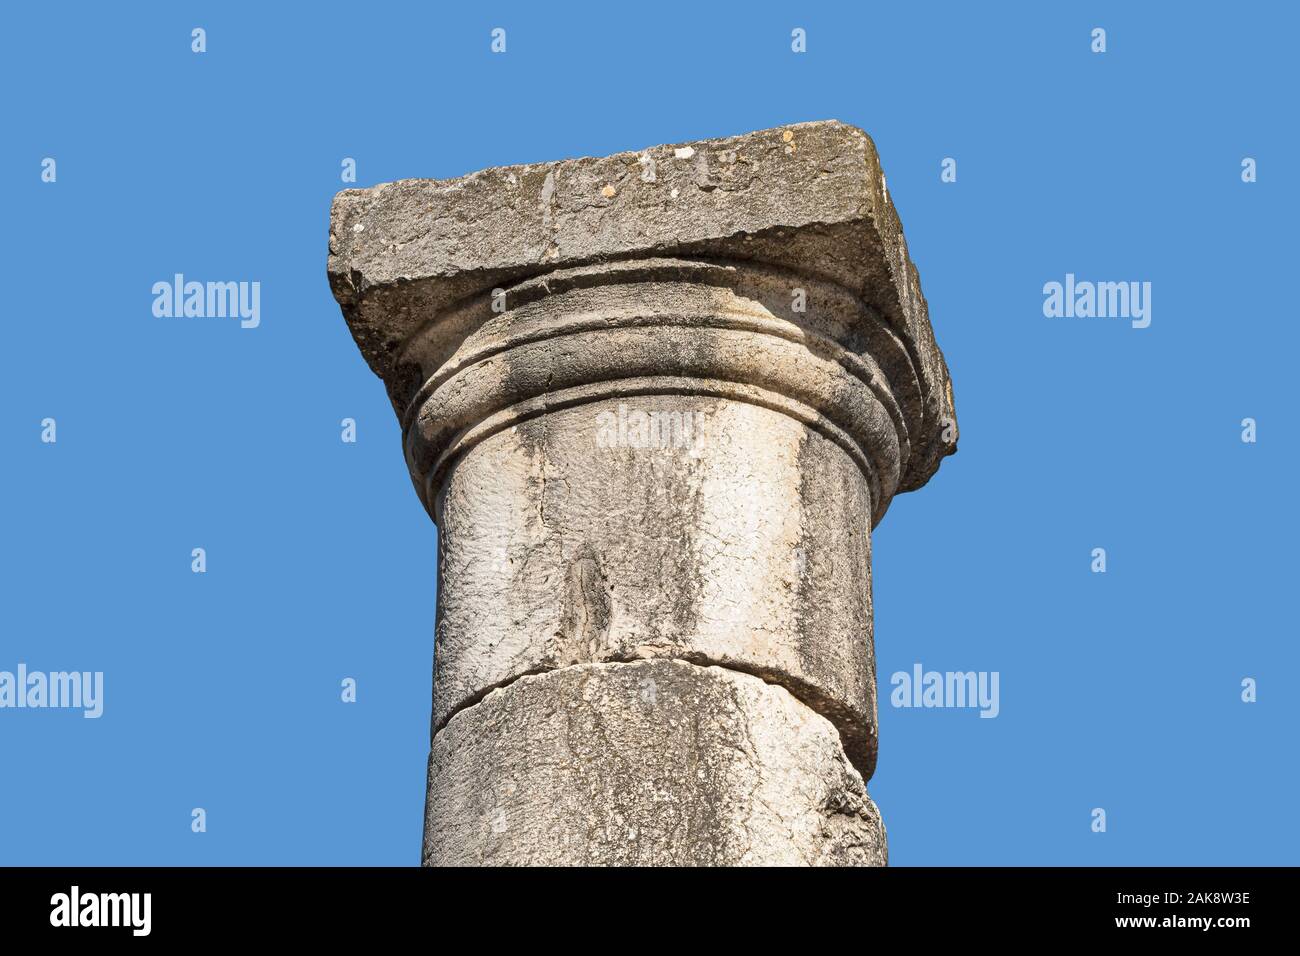 basalt stone capital in the greek doric style on top of a plain column with a sky blue background at Bar'am park in Israel Stock Photo